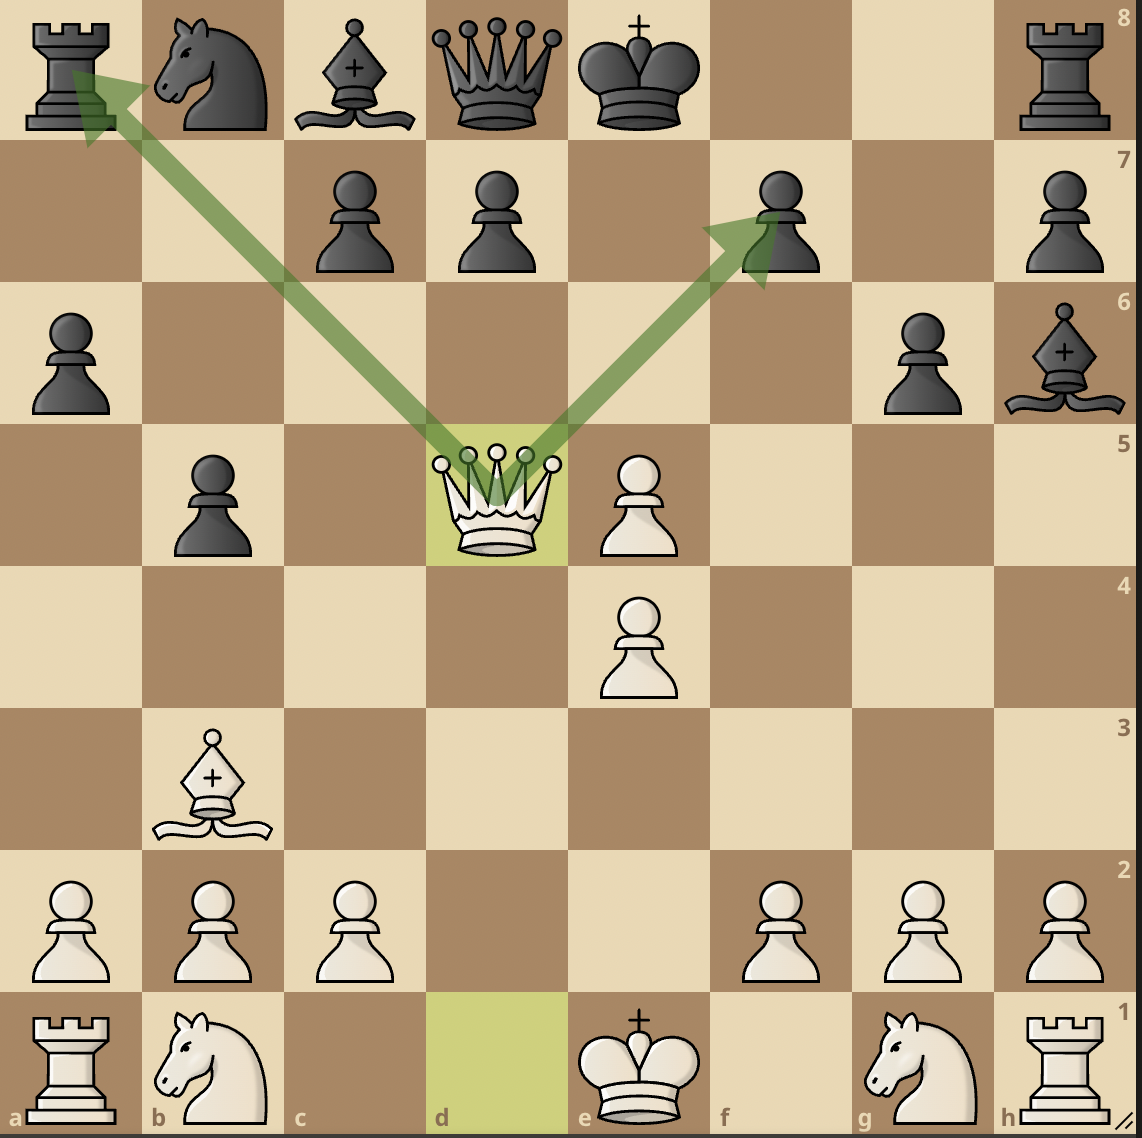 double attack in chess